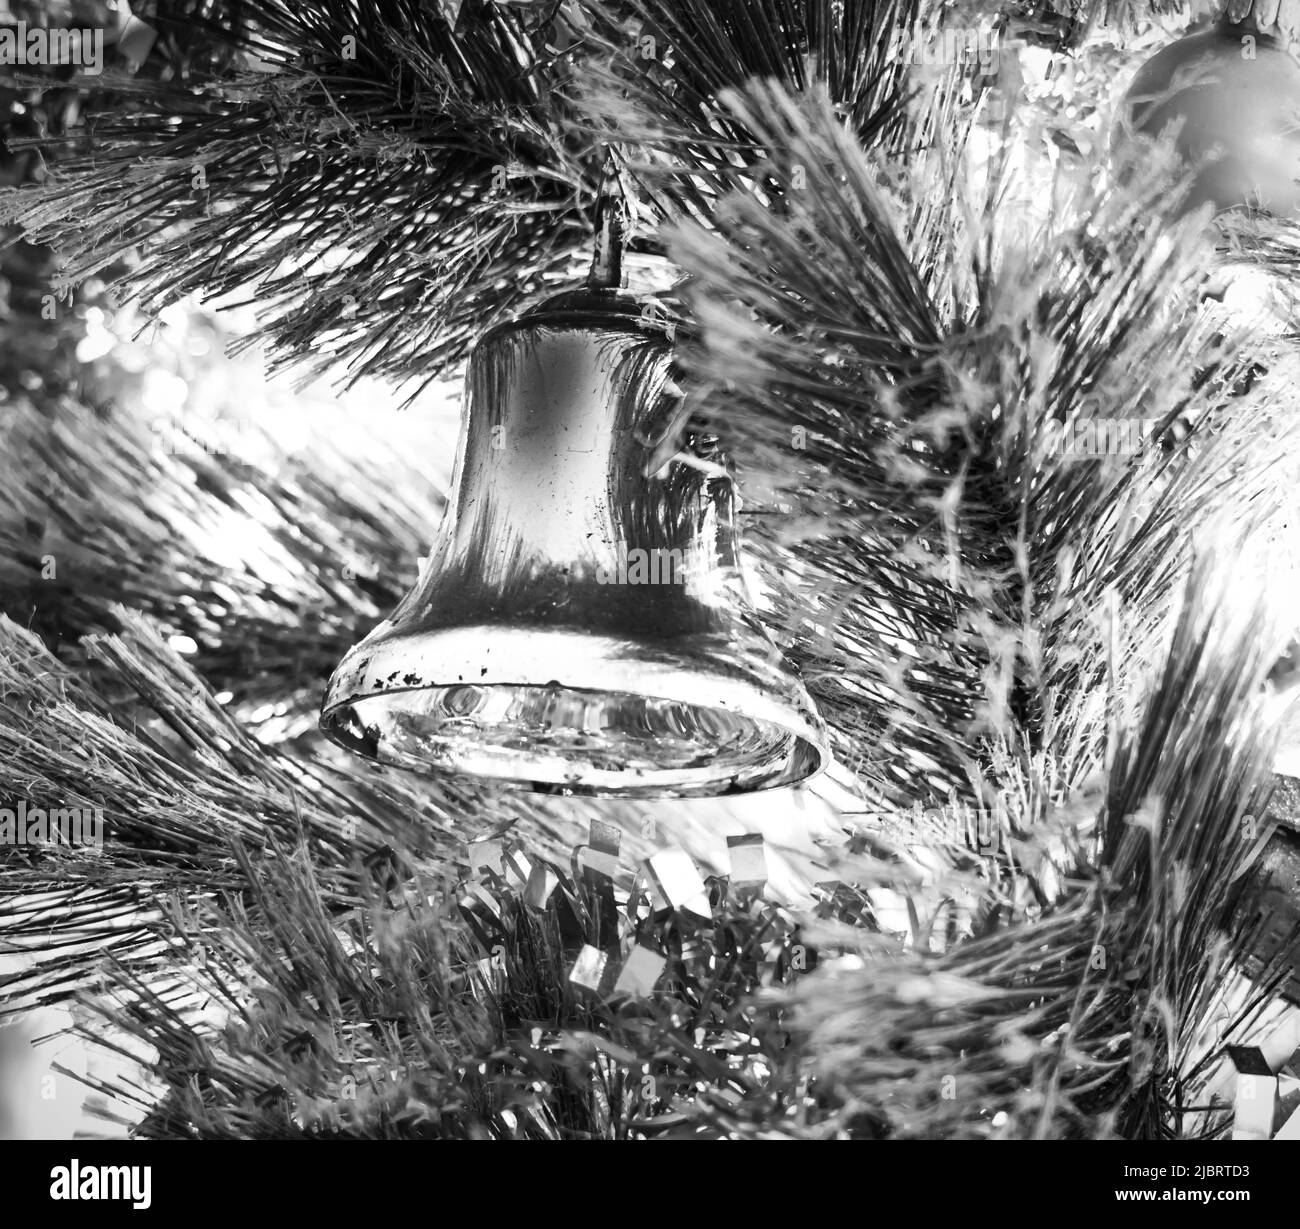 Shiny metallic silver bell Christmas ornament hanging in a lighted Christmas tree in black and white Stock Photo